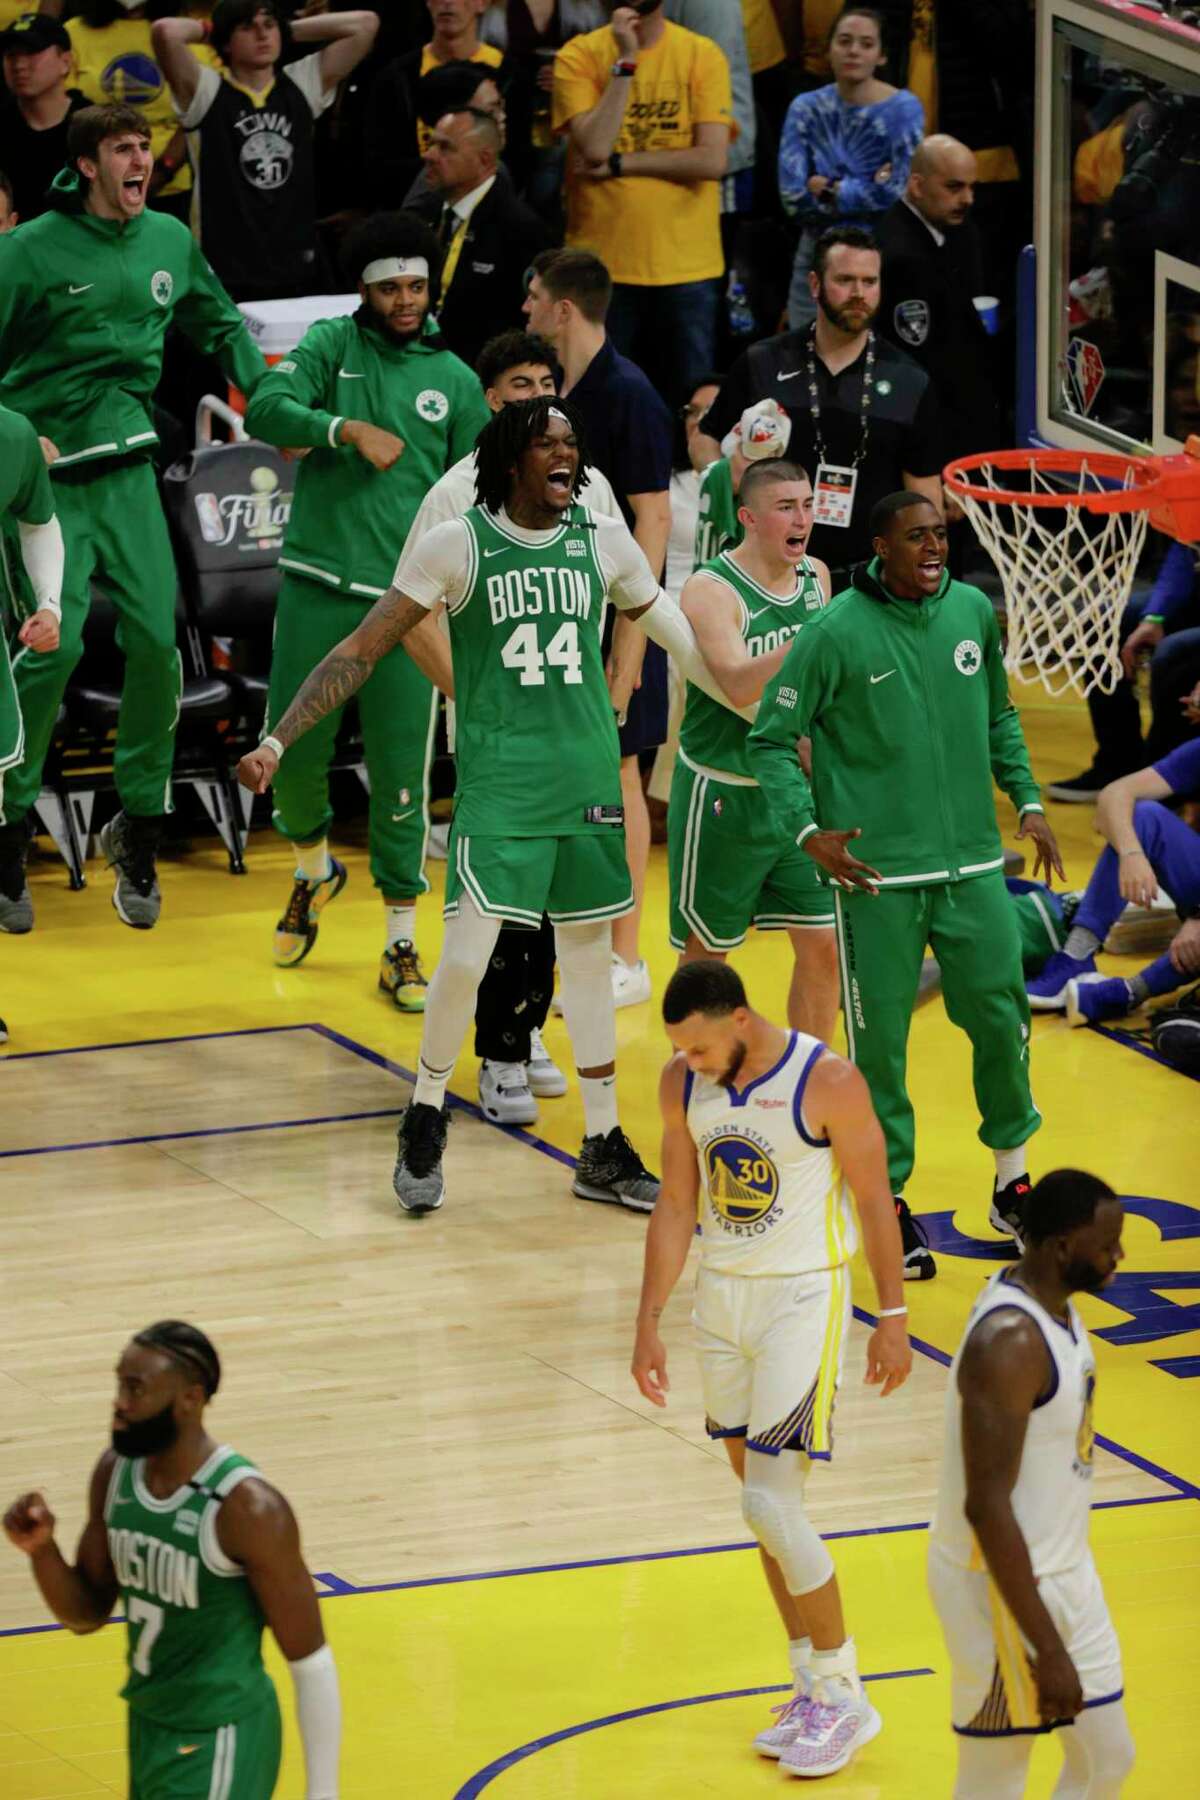 The Boston Celtics celebrate their come from behind win 120 to 108 over the Golden State Warriors in game 1 of the NBA Finals at Chase Center in San Francisco, Calif., on Thursday, June 2, 2022.